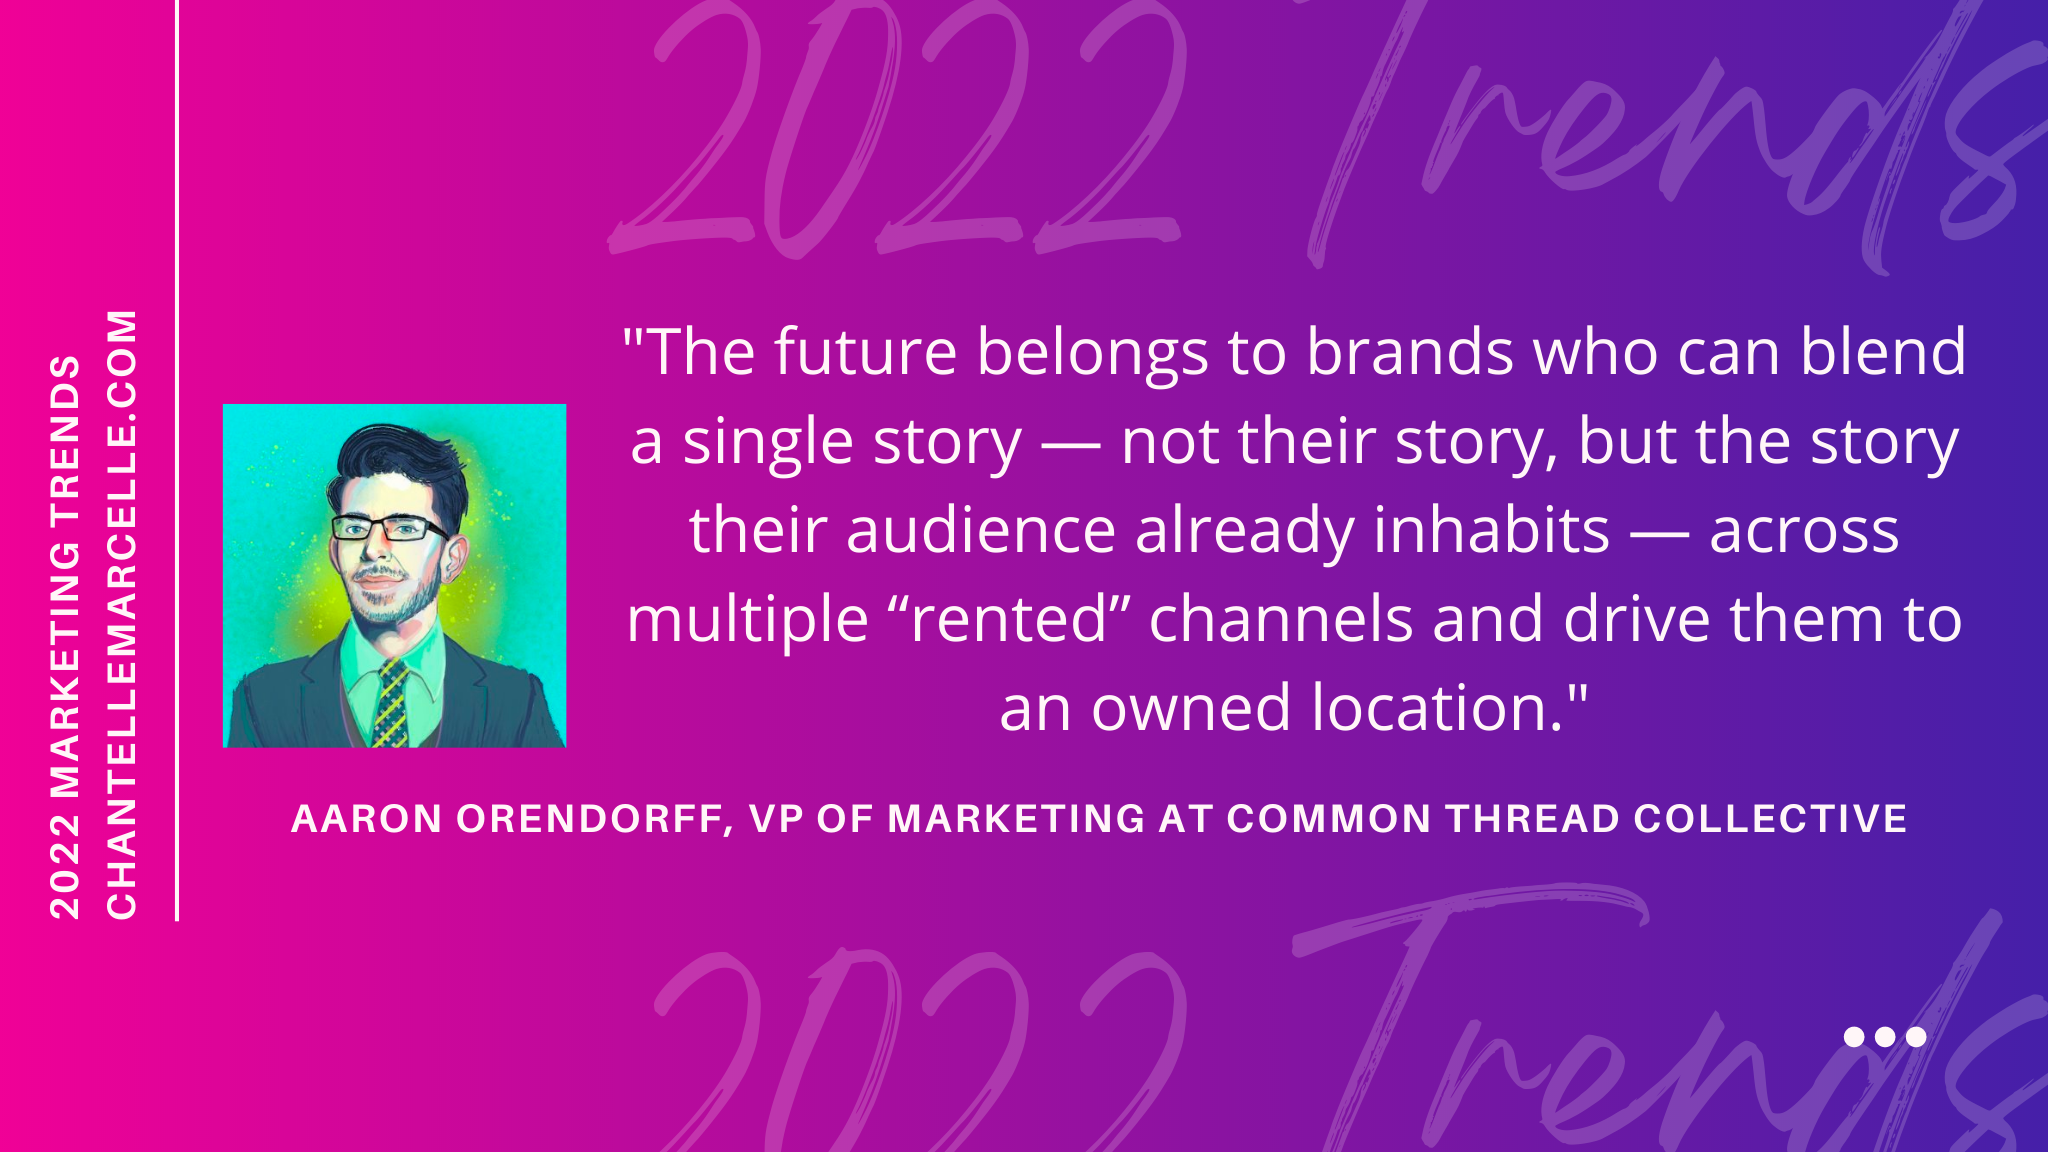 2022 marketing trends and predictions by aaron orendorff, vp of marketing at common thread collective, an ecommerce marketing agency